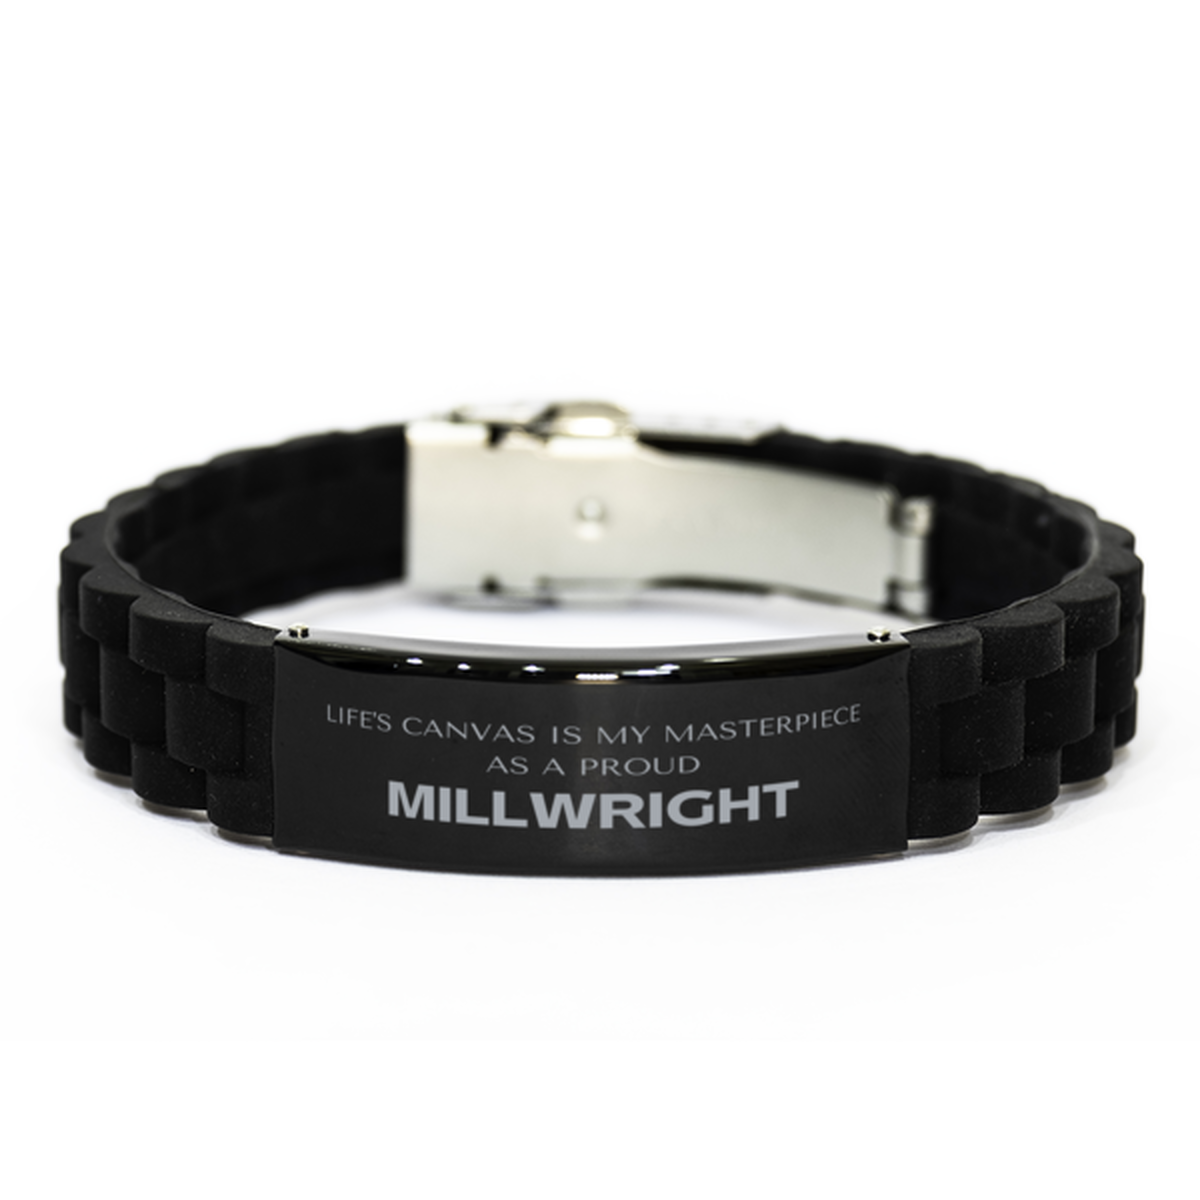 Proud Millwright Gifts, Life's canvas is my masterpiece, Epic Birthday Christmas Unique Black Glidelock Clasp Bracelet For Millwright, Coworkers, Men, Women, Friends